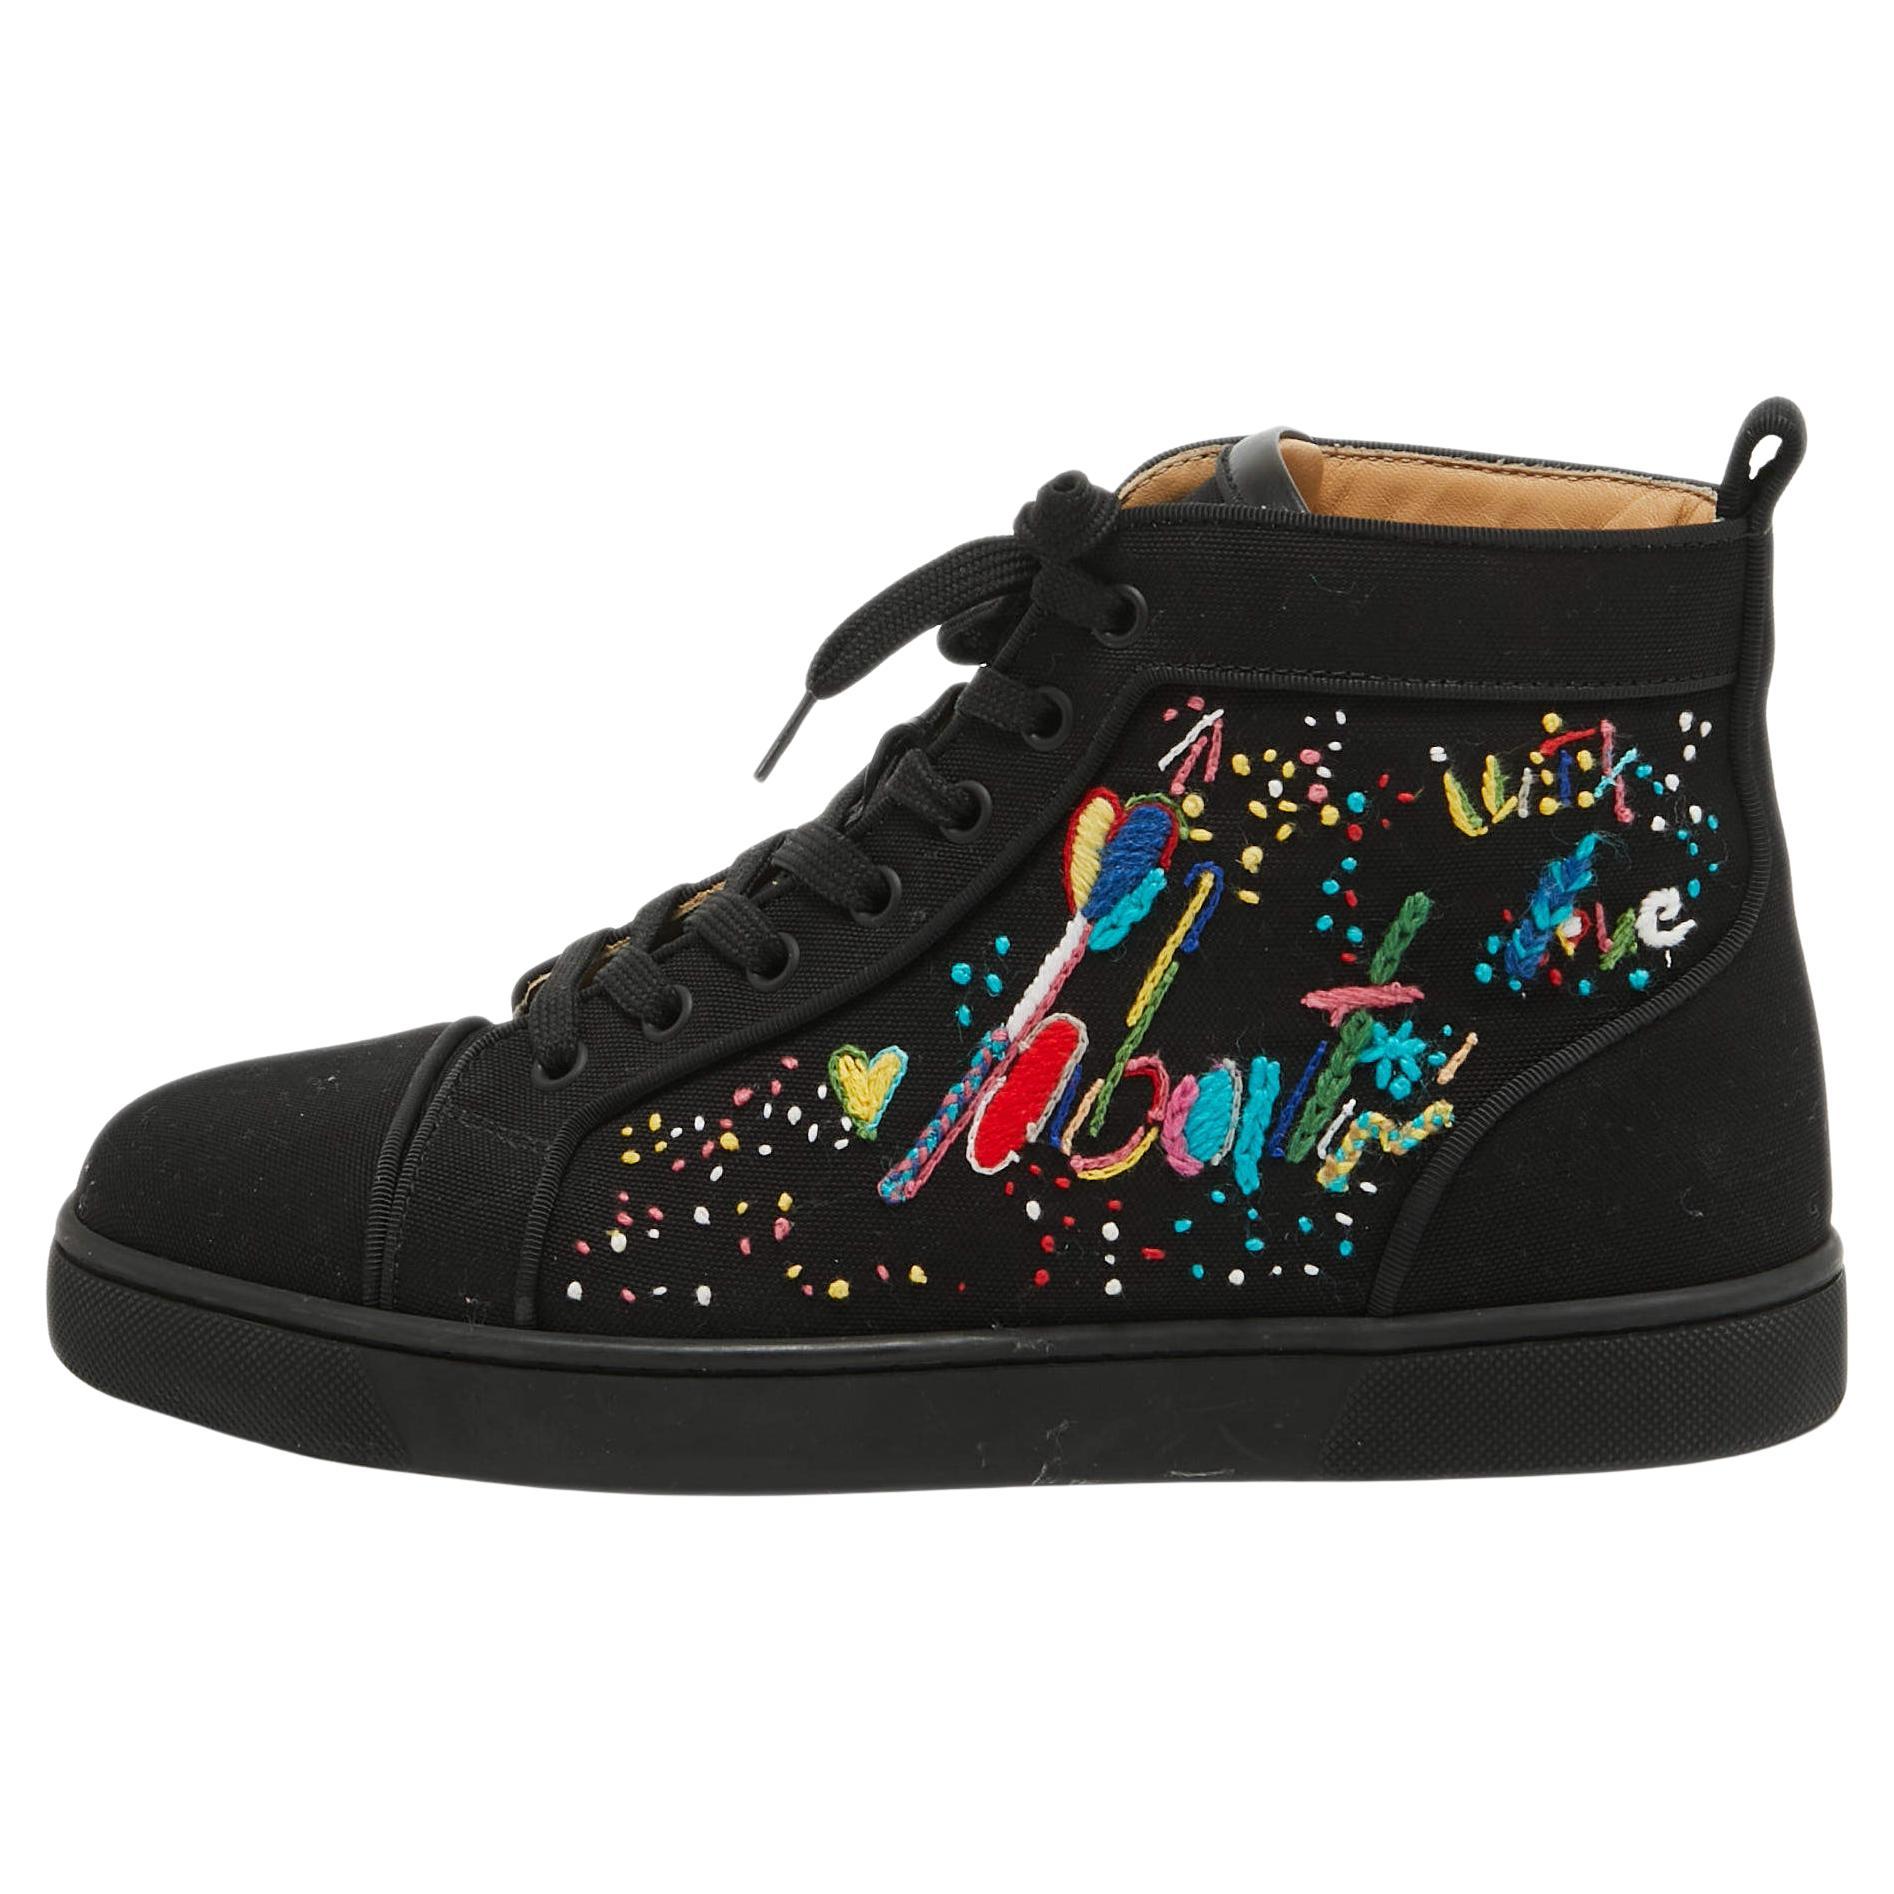 Christian Louboutin Black Canvas Embroidered Louis Orlato Sneakers Size 40